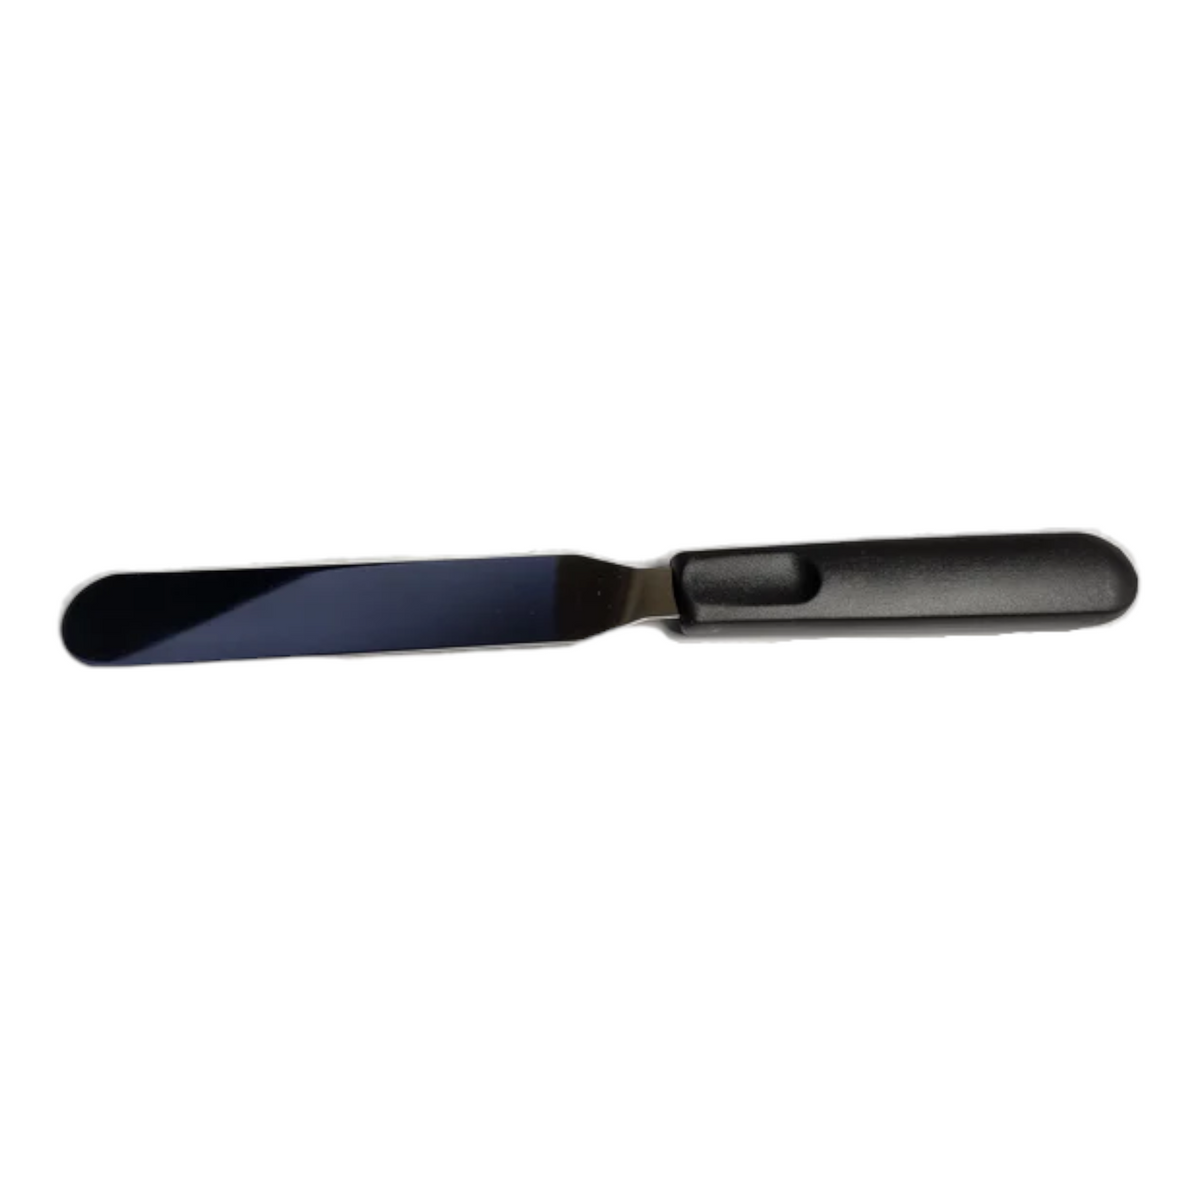 Straight Spatula, Stainless Steel Blade, Plastic Handle, 11 inch